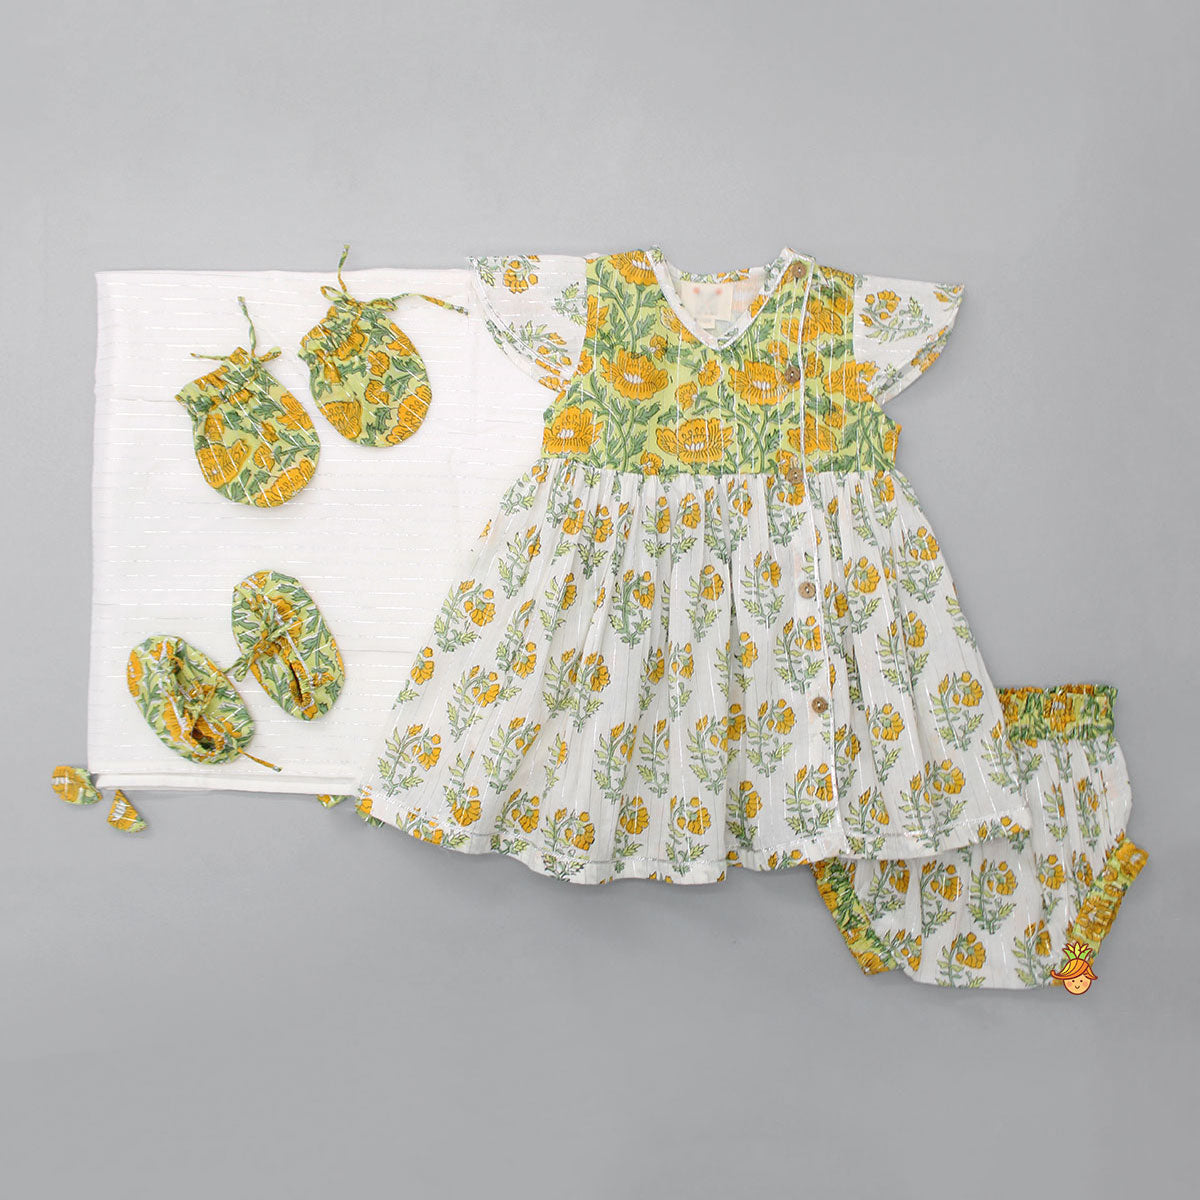 Hand Block Printed Multicolour Infant Baby Set With Swaddle